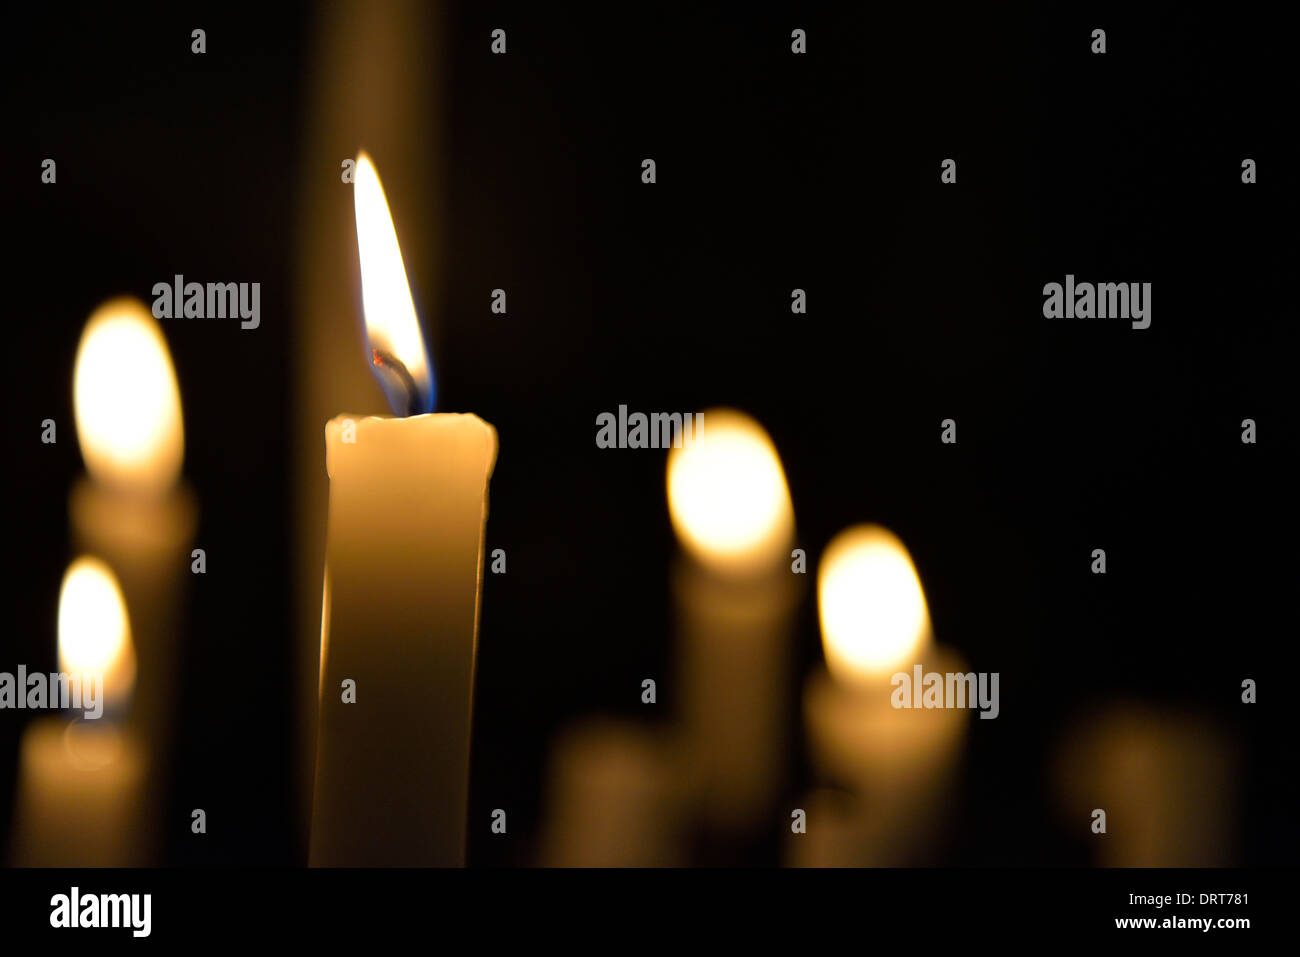 Candles flame over dark background Stock Photo